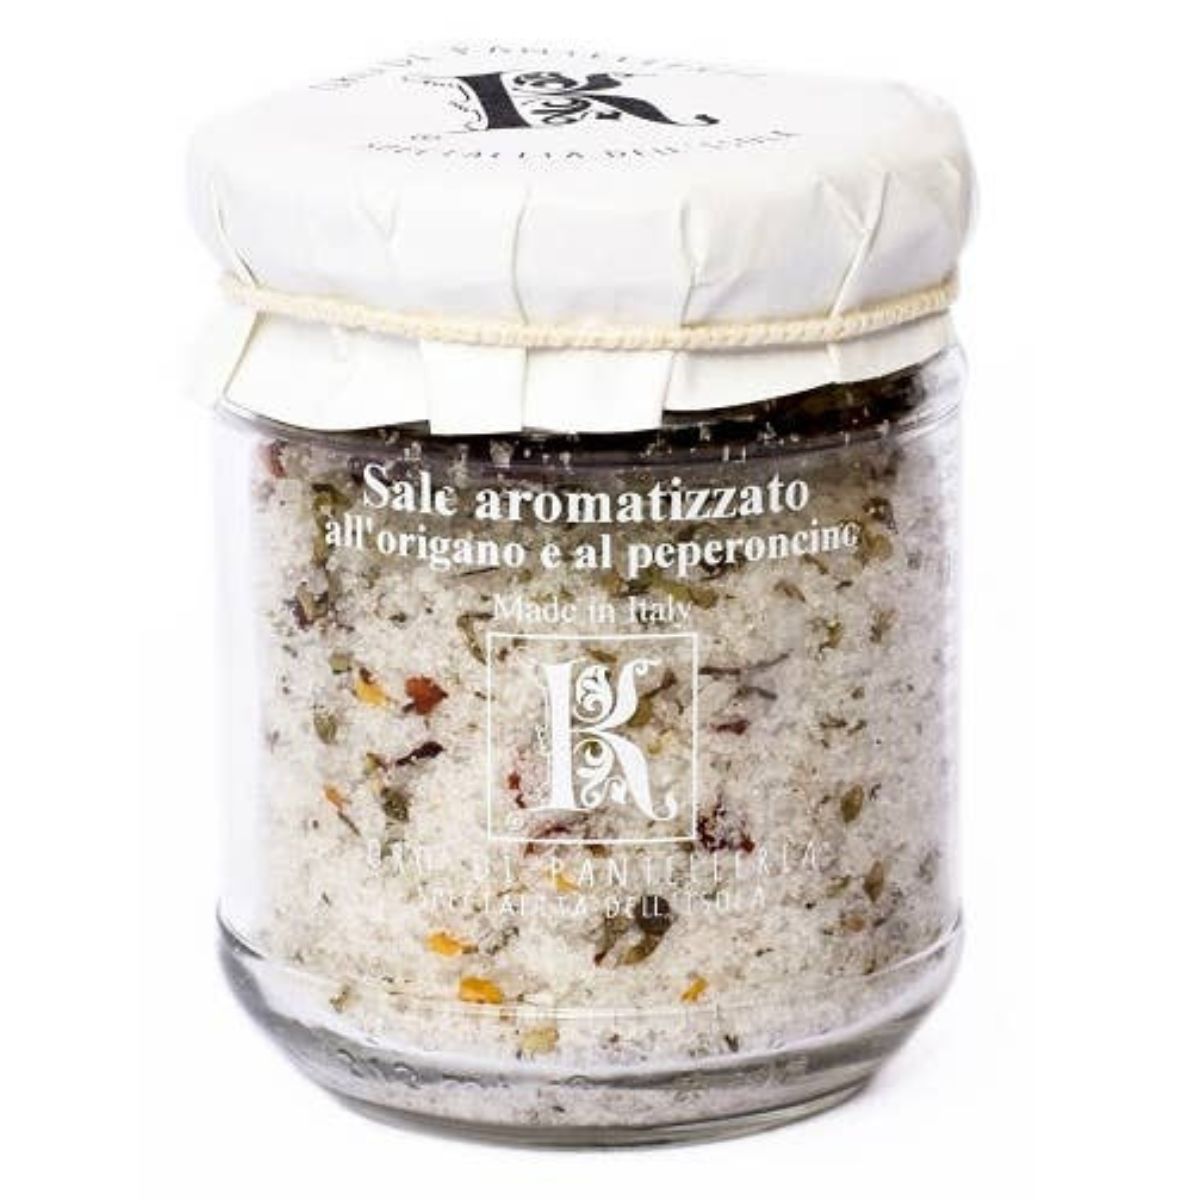 Sea Salt with Oregano and Peperoncino by Kazzen- A great addition to your pantry